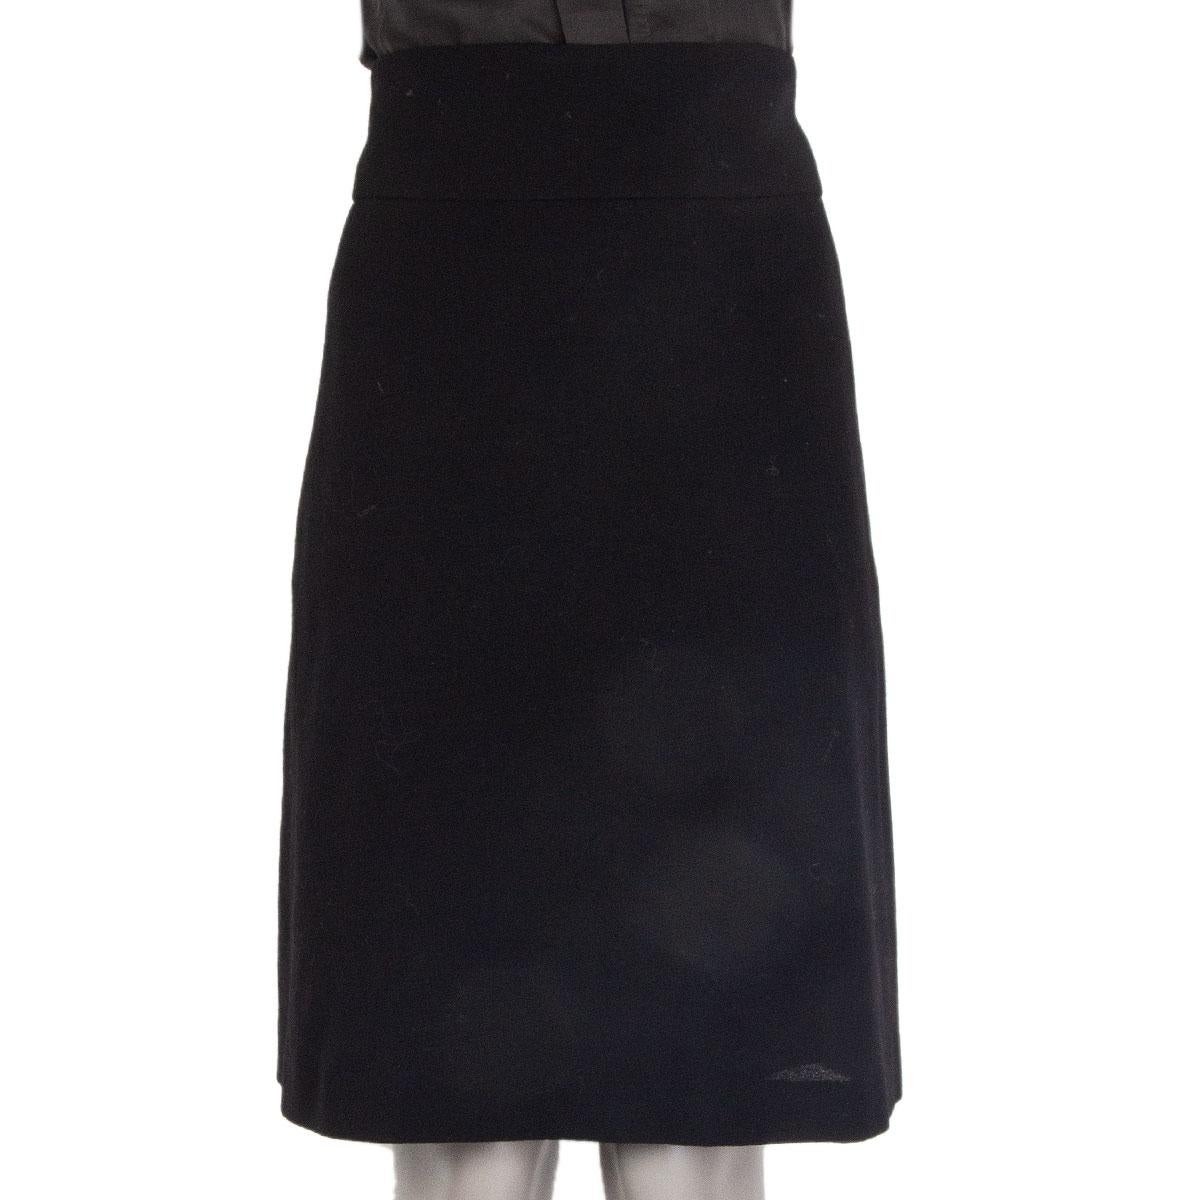 authentic Yves Saint Laurent high waisted knee-length flared skirt in black wool (100%). Closes with a zipper on the back. Lined (missing content ). Has been worn and is in excellent condition.

Tag Size Tag Missing
Size XS
Waist 70cm (27.3in)
Hips